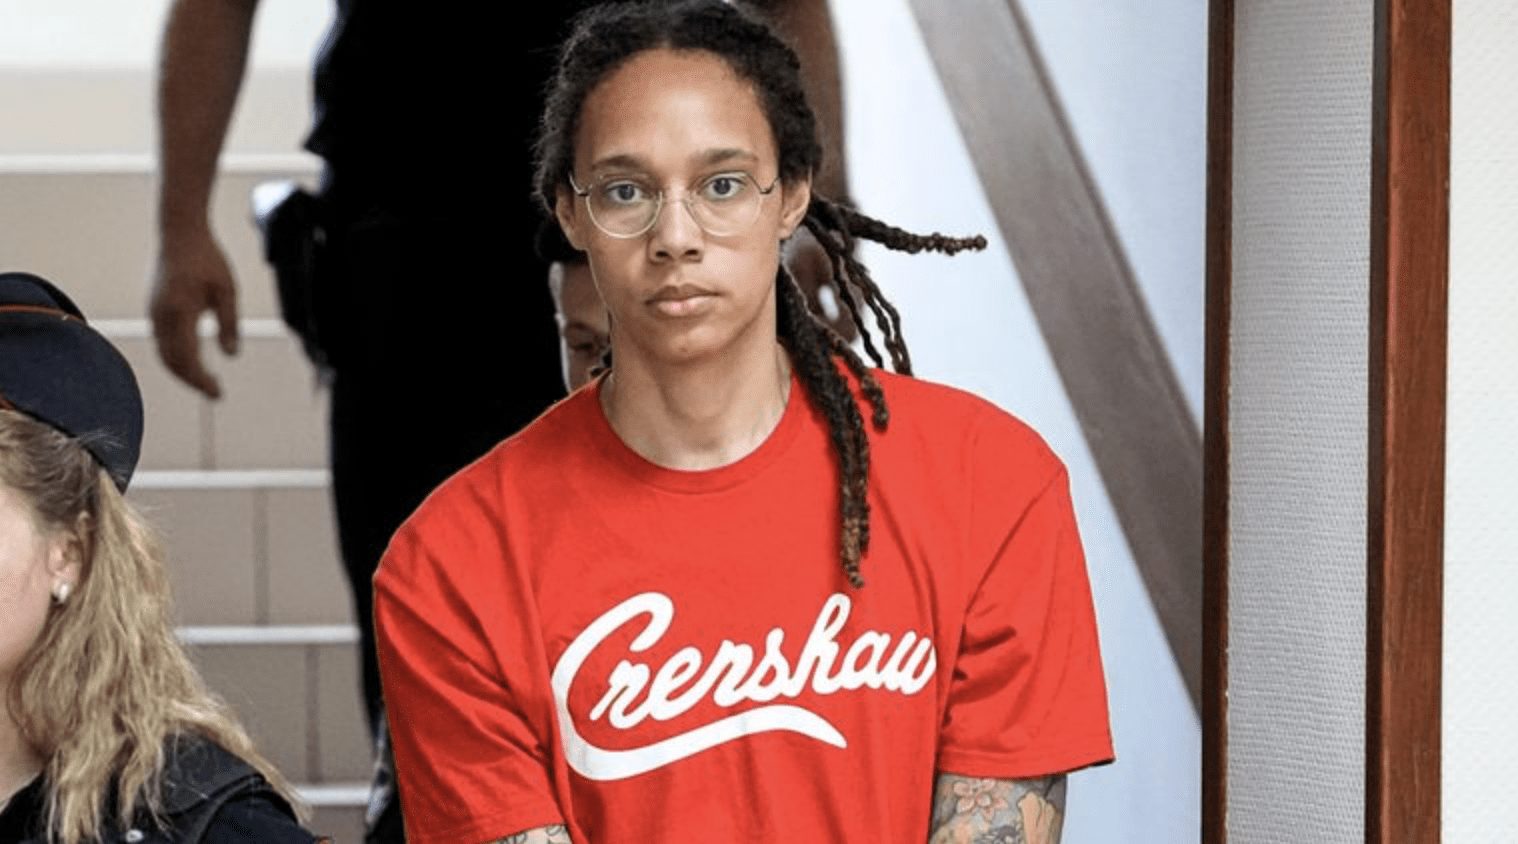 WNBA Player Brittney Griner Pleads Guilty in Russian Trial